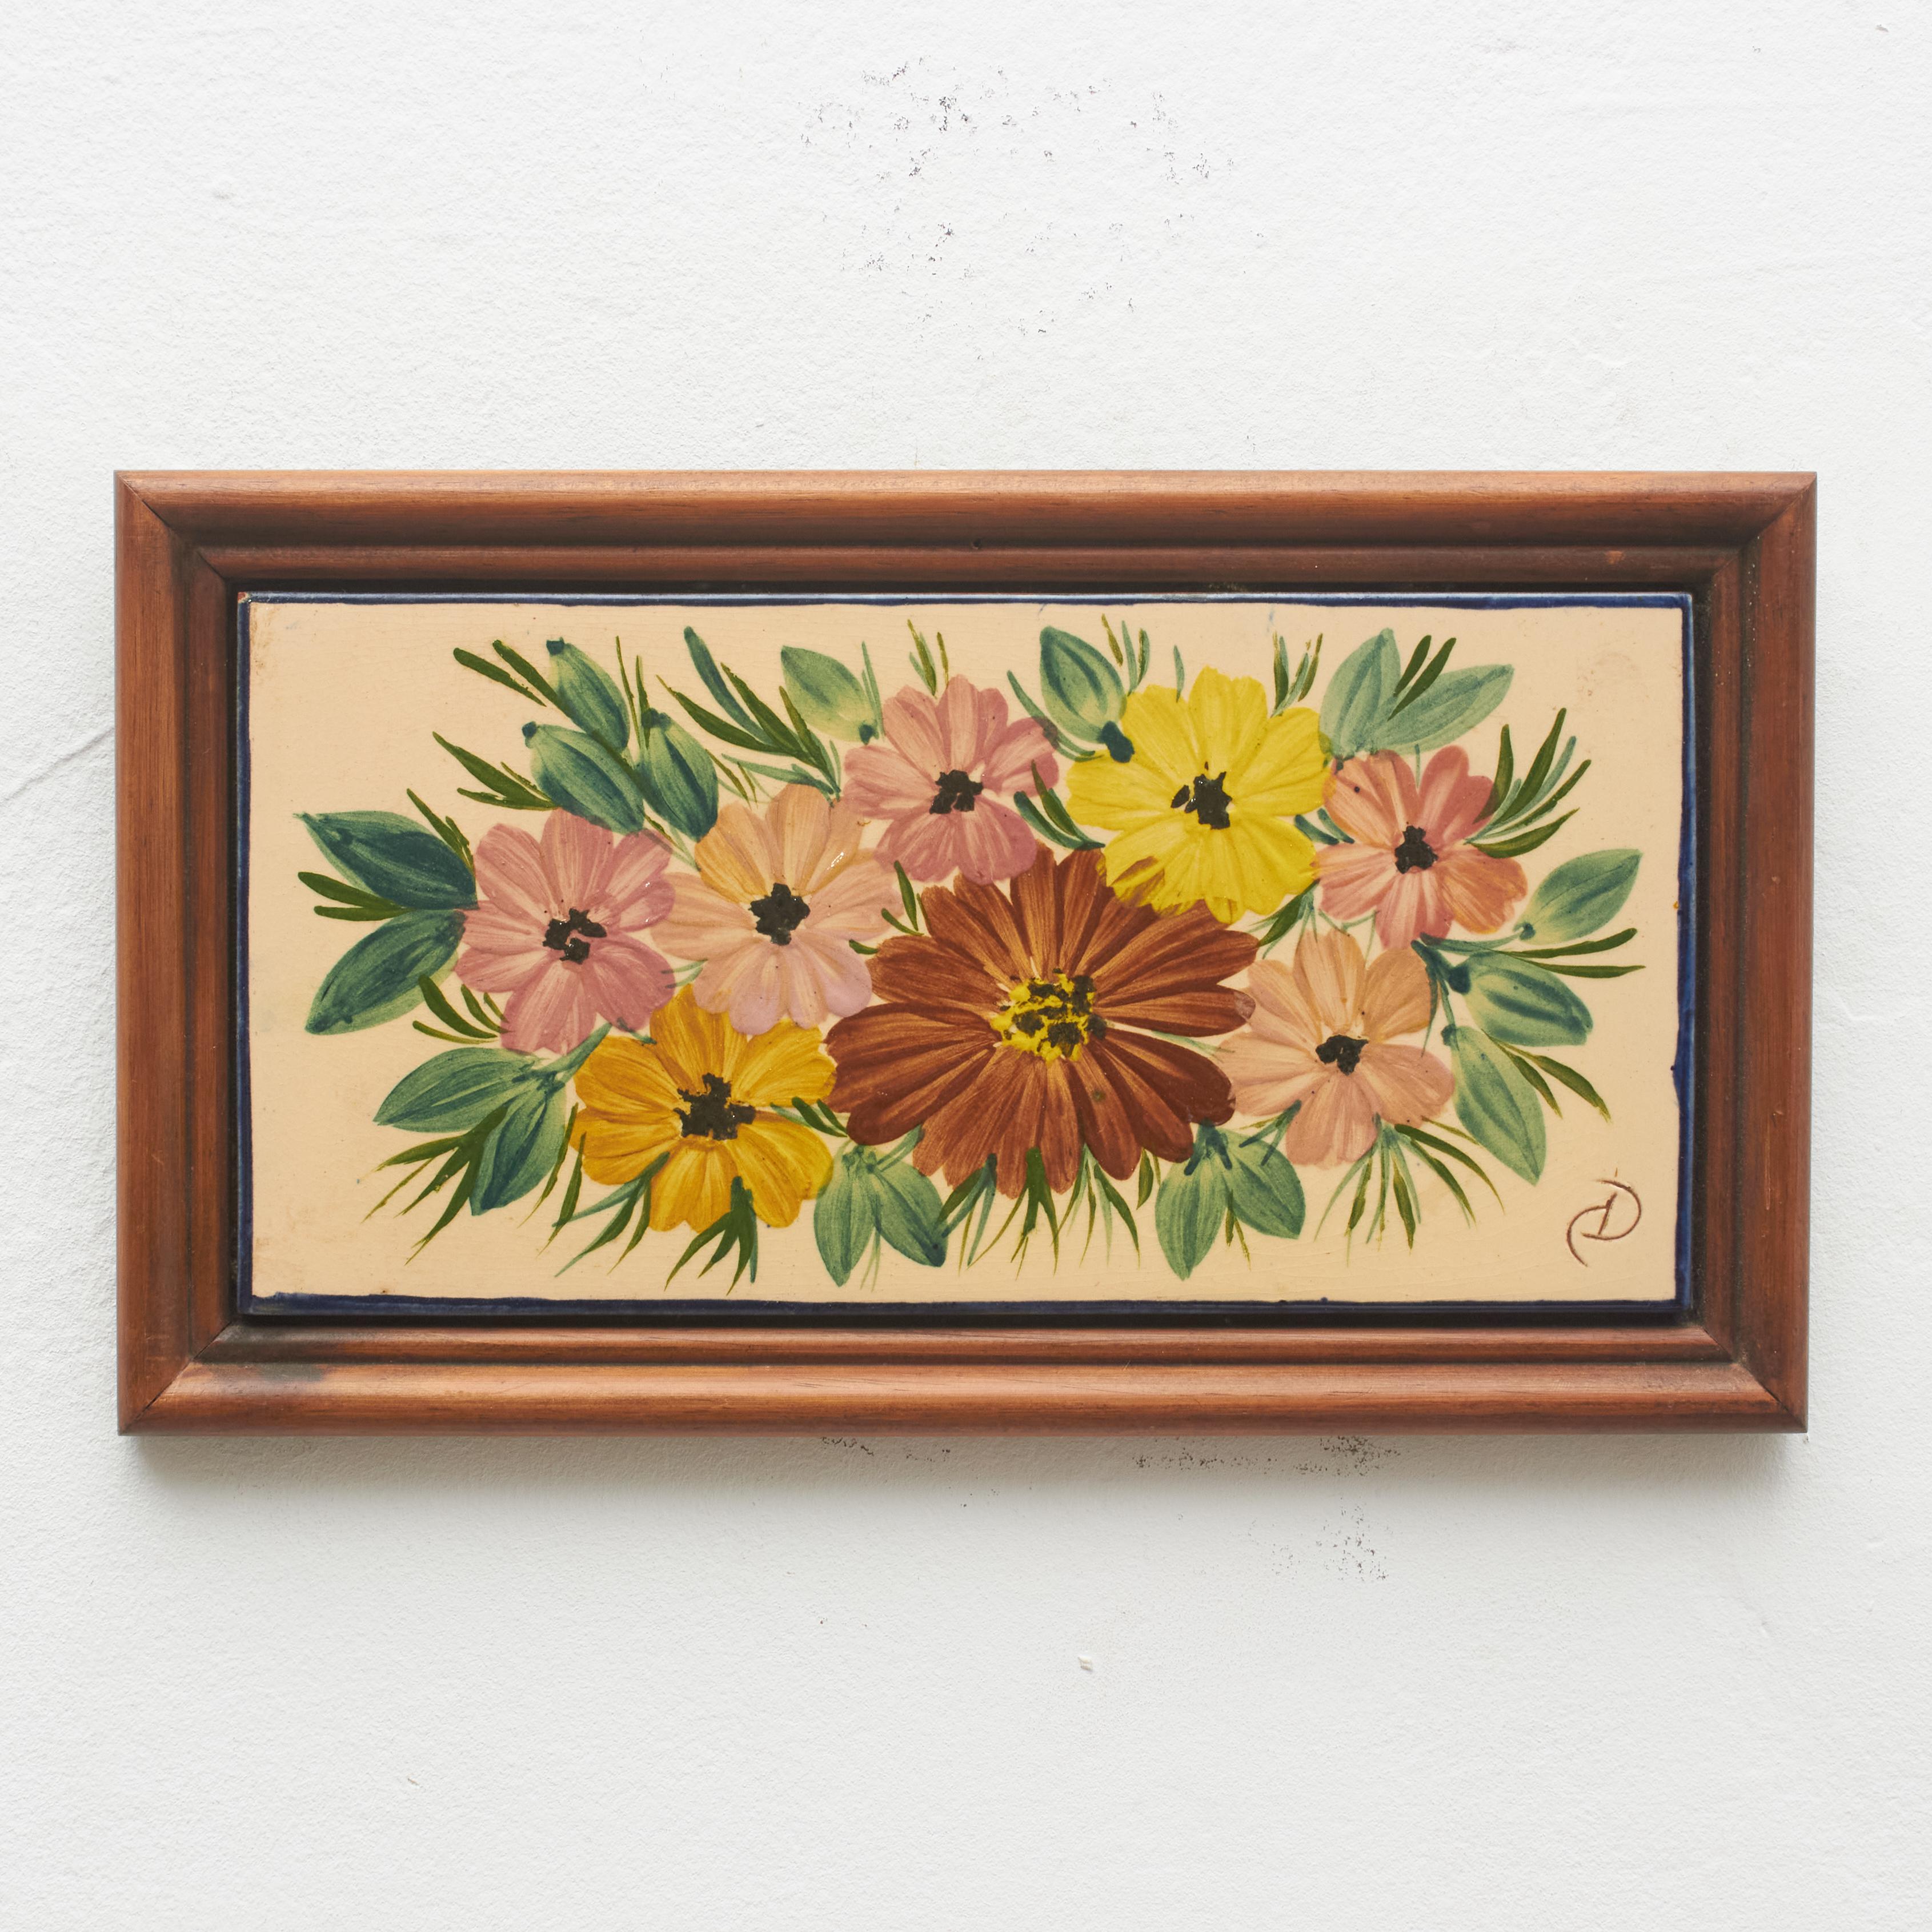 Ceramic hand painted artwork of flowers, designed by Catalan artist Diaz Costa, circa 1960.
Framed. Signed.

In original condition, with minor wear consistent of age and use, preserving a beautiul patina.